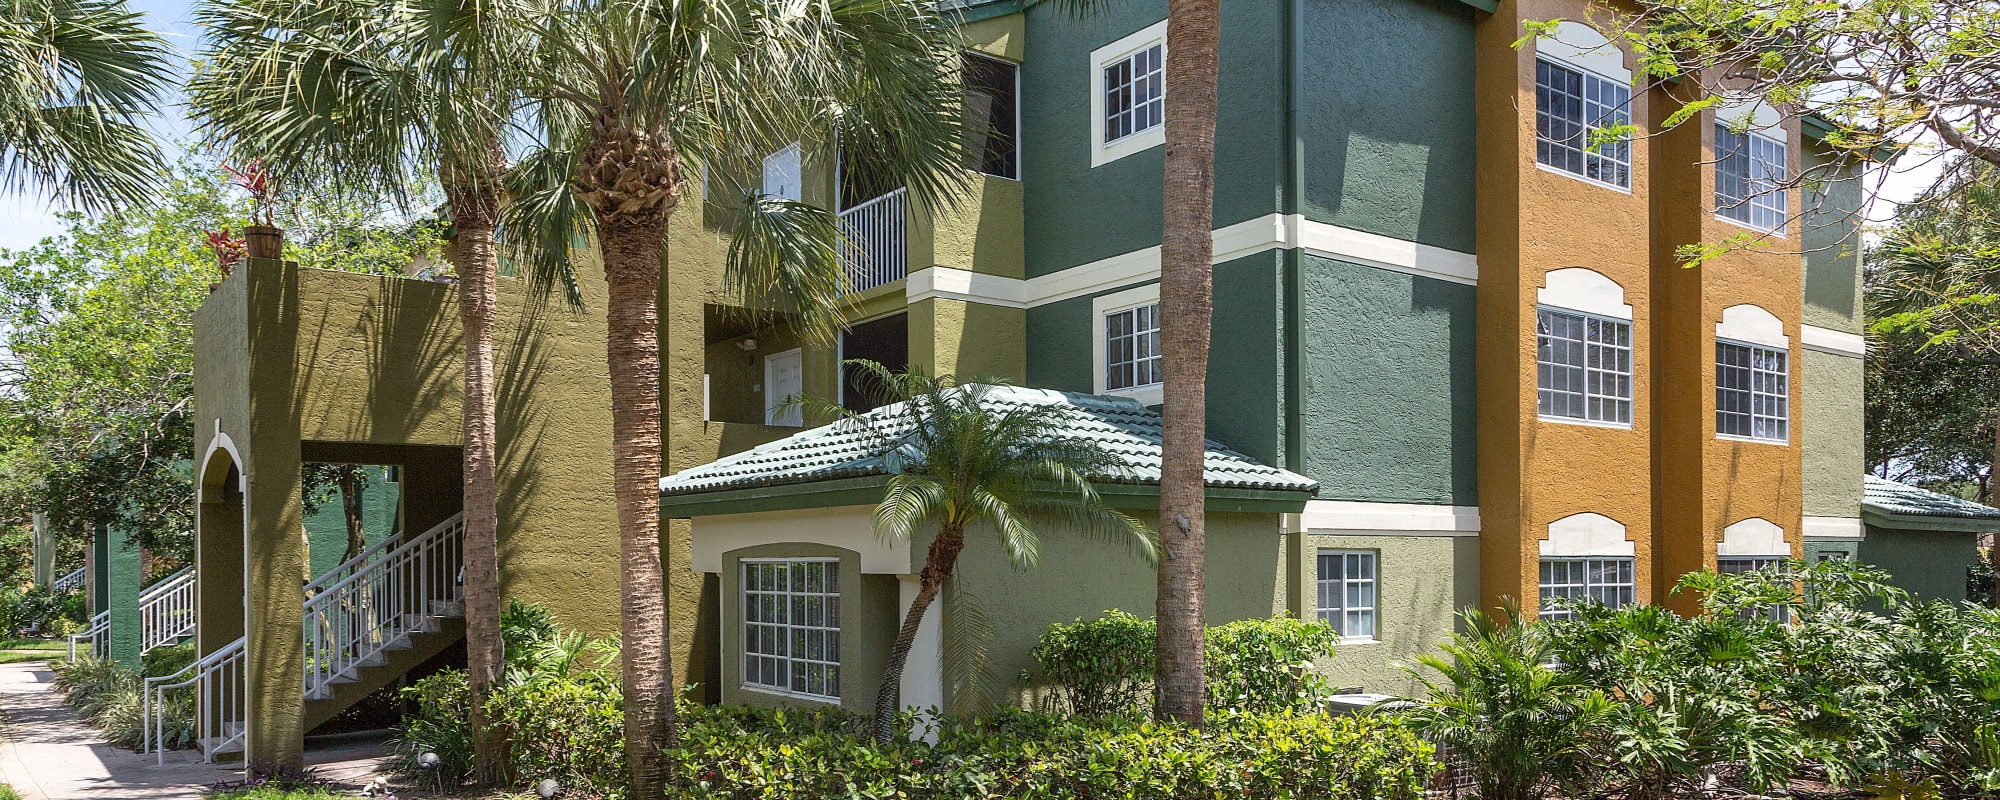 Residents of Sanctuary Cove Apartments in West Palm Beach, Florida